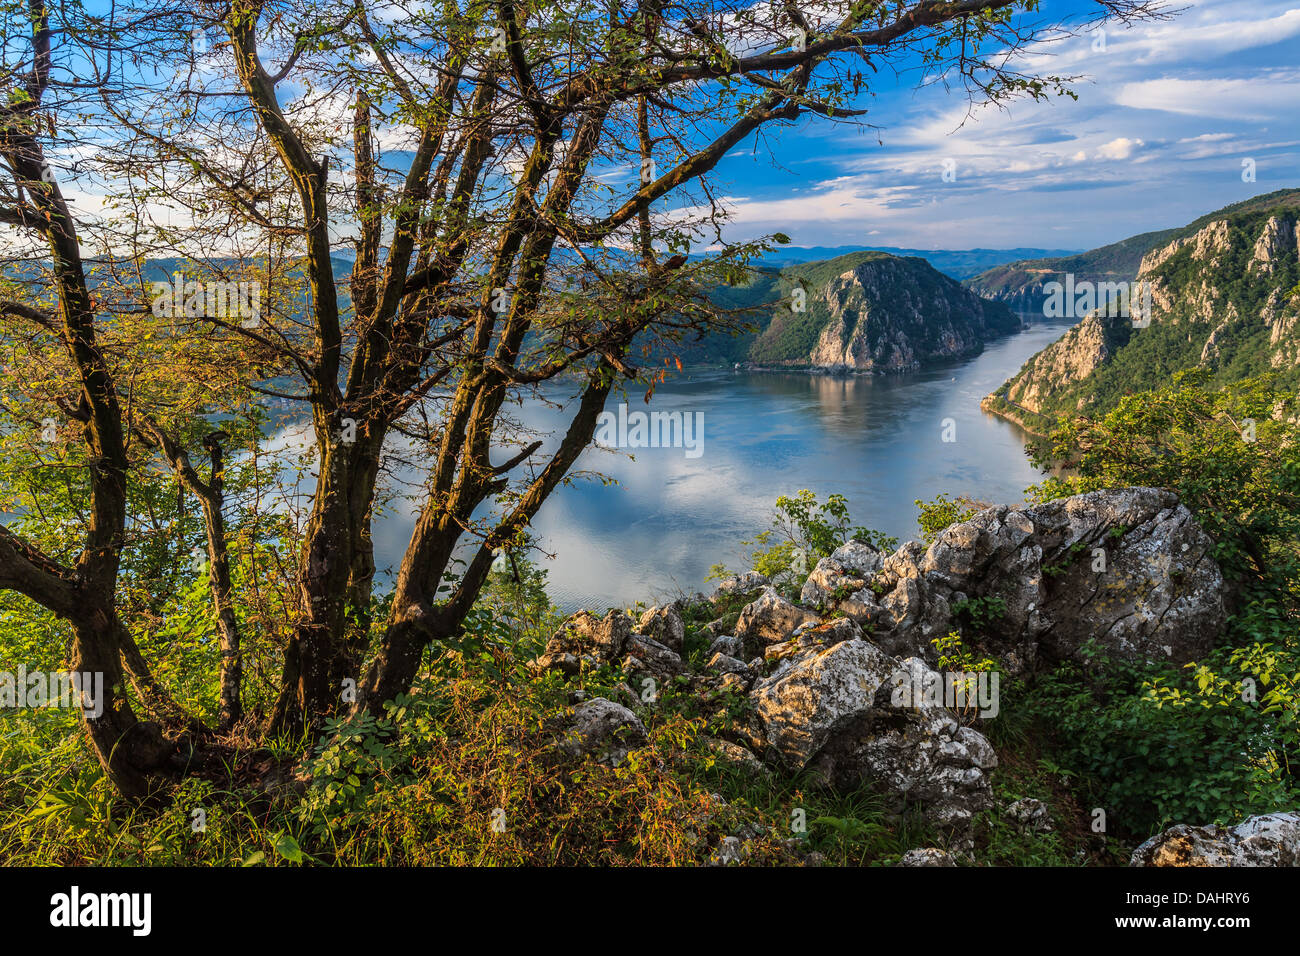 The Danube Gorges Stock Photo